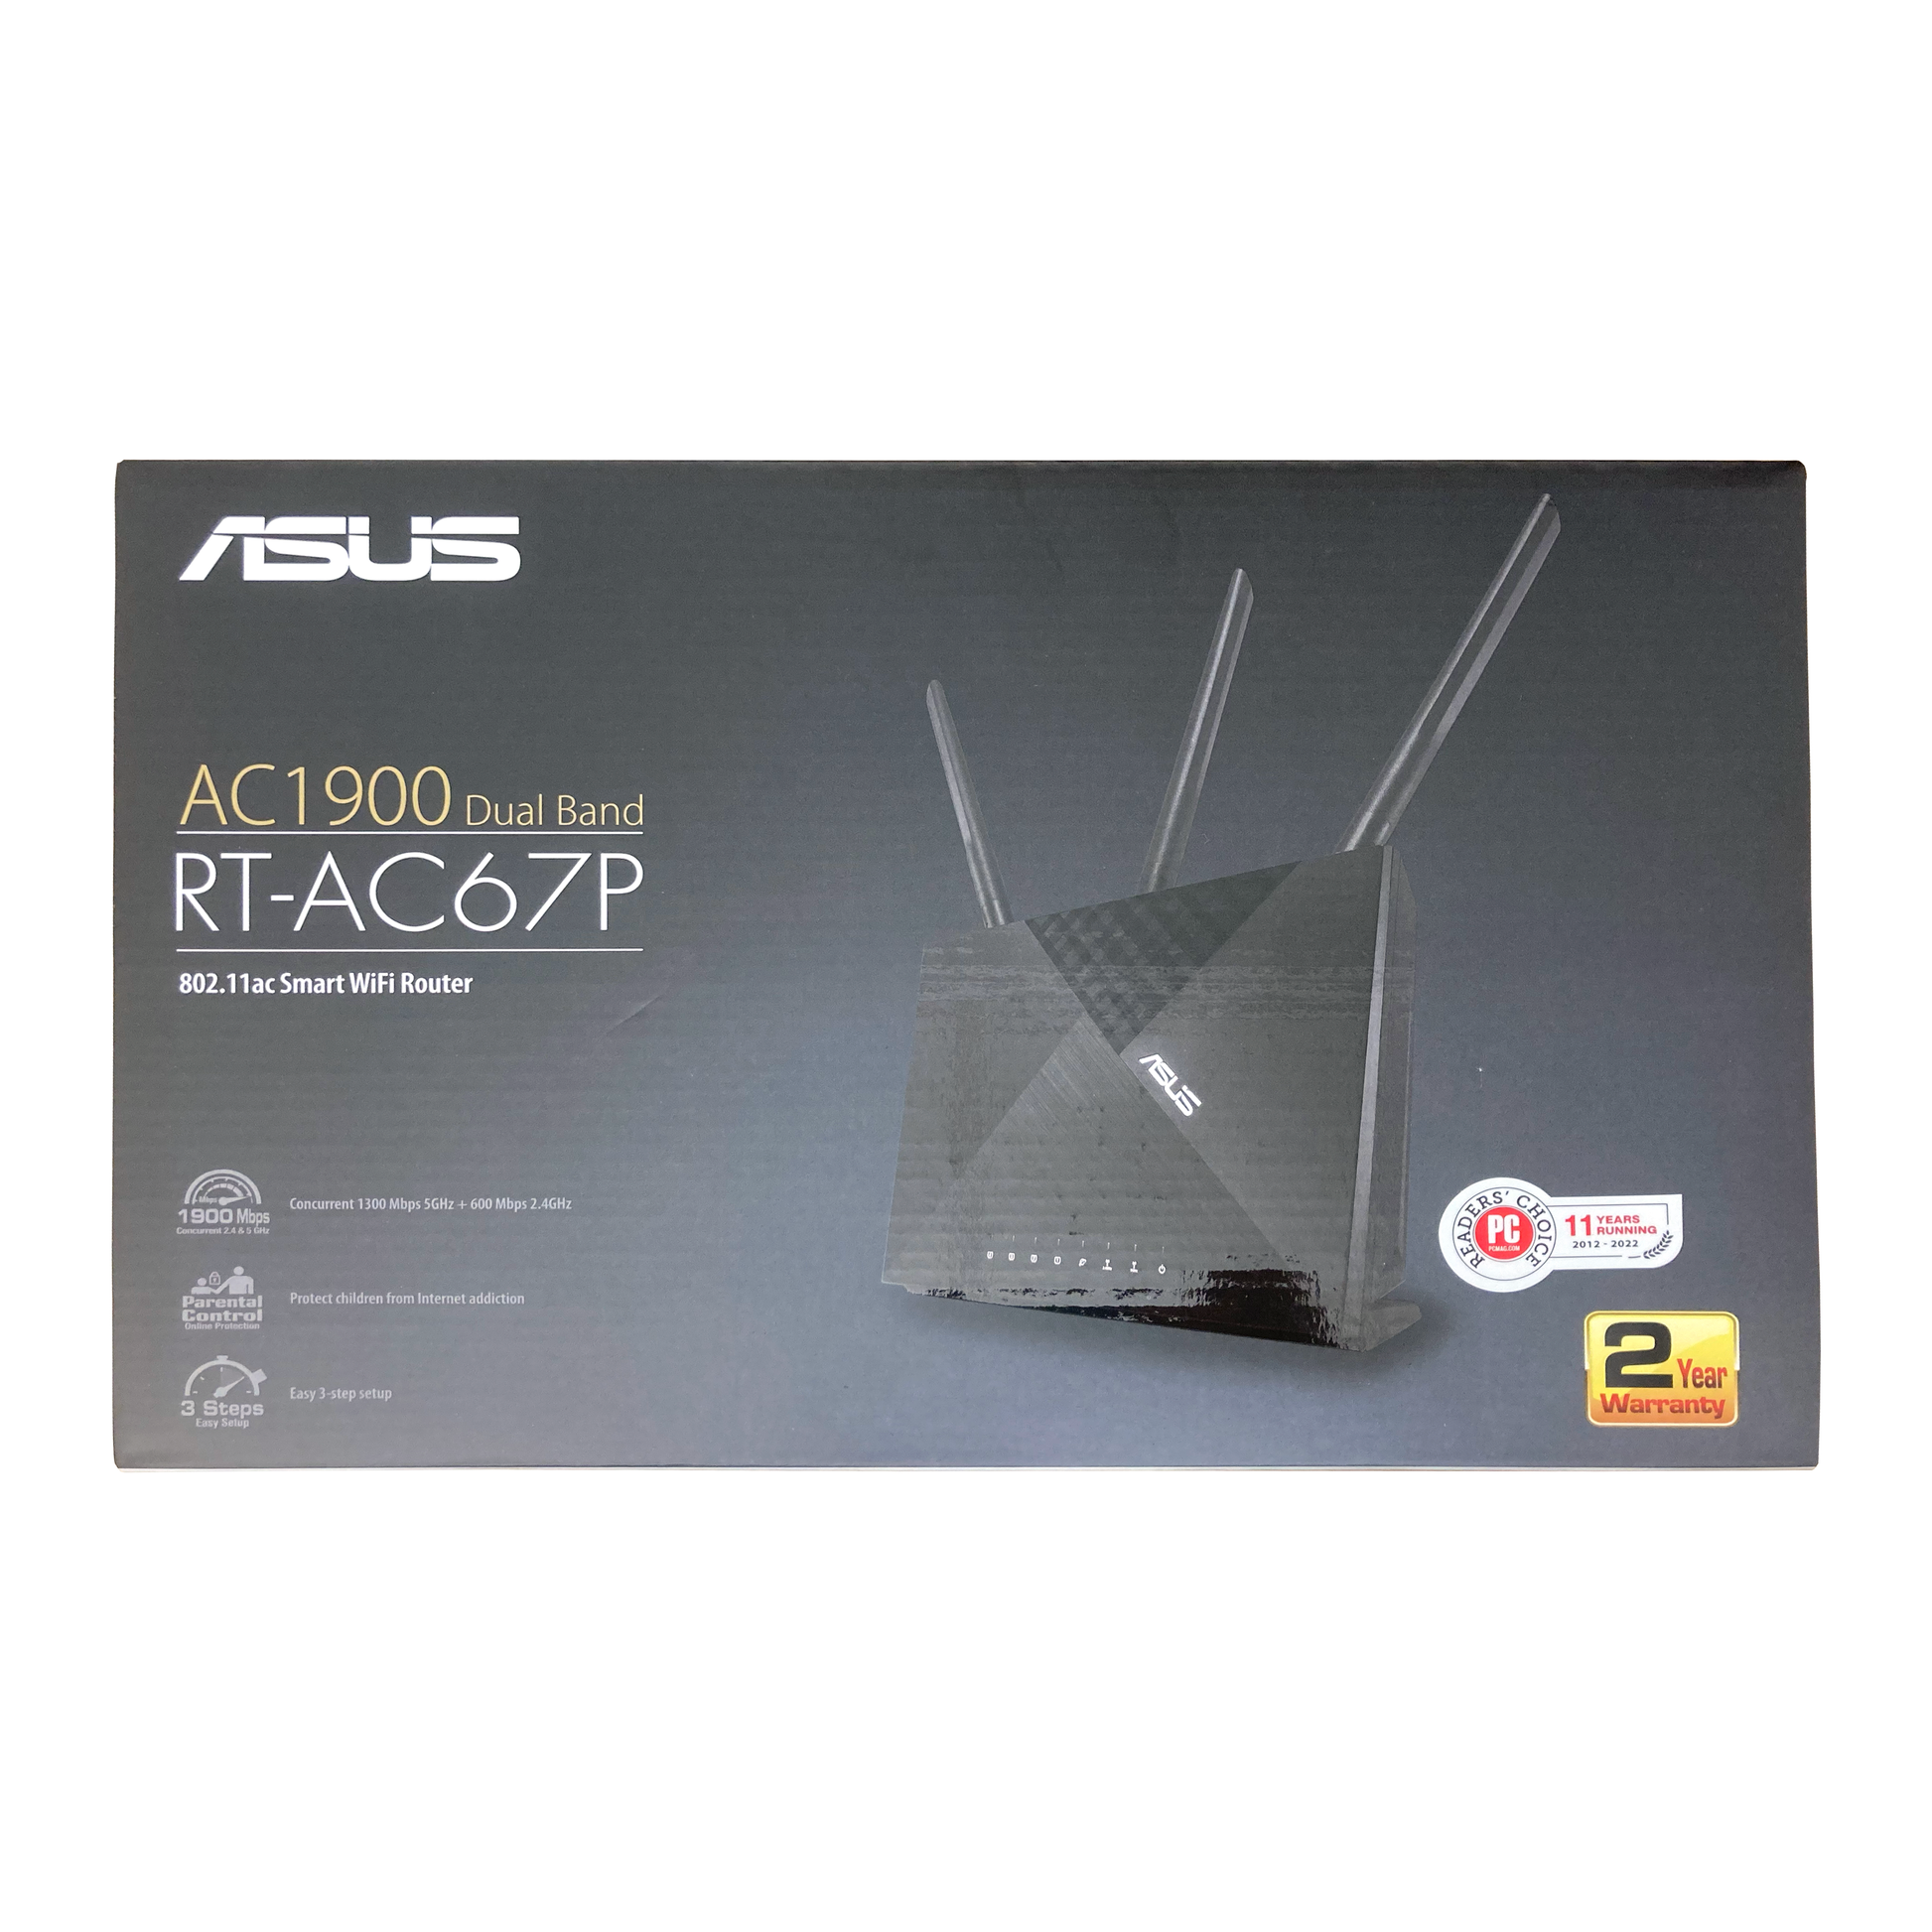 Sold by Miele Manufacturing (Miele MFG). ASUS AC 1900 Dual Band RT AC67P 802.11ac Smart WiFi Router. Pennsylvania Skill (PA Skill) is powered by Pace-O-Matic (POM) and built by Miele Manufacturing (Miele MFG).